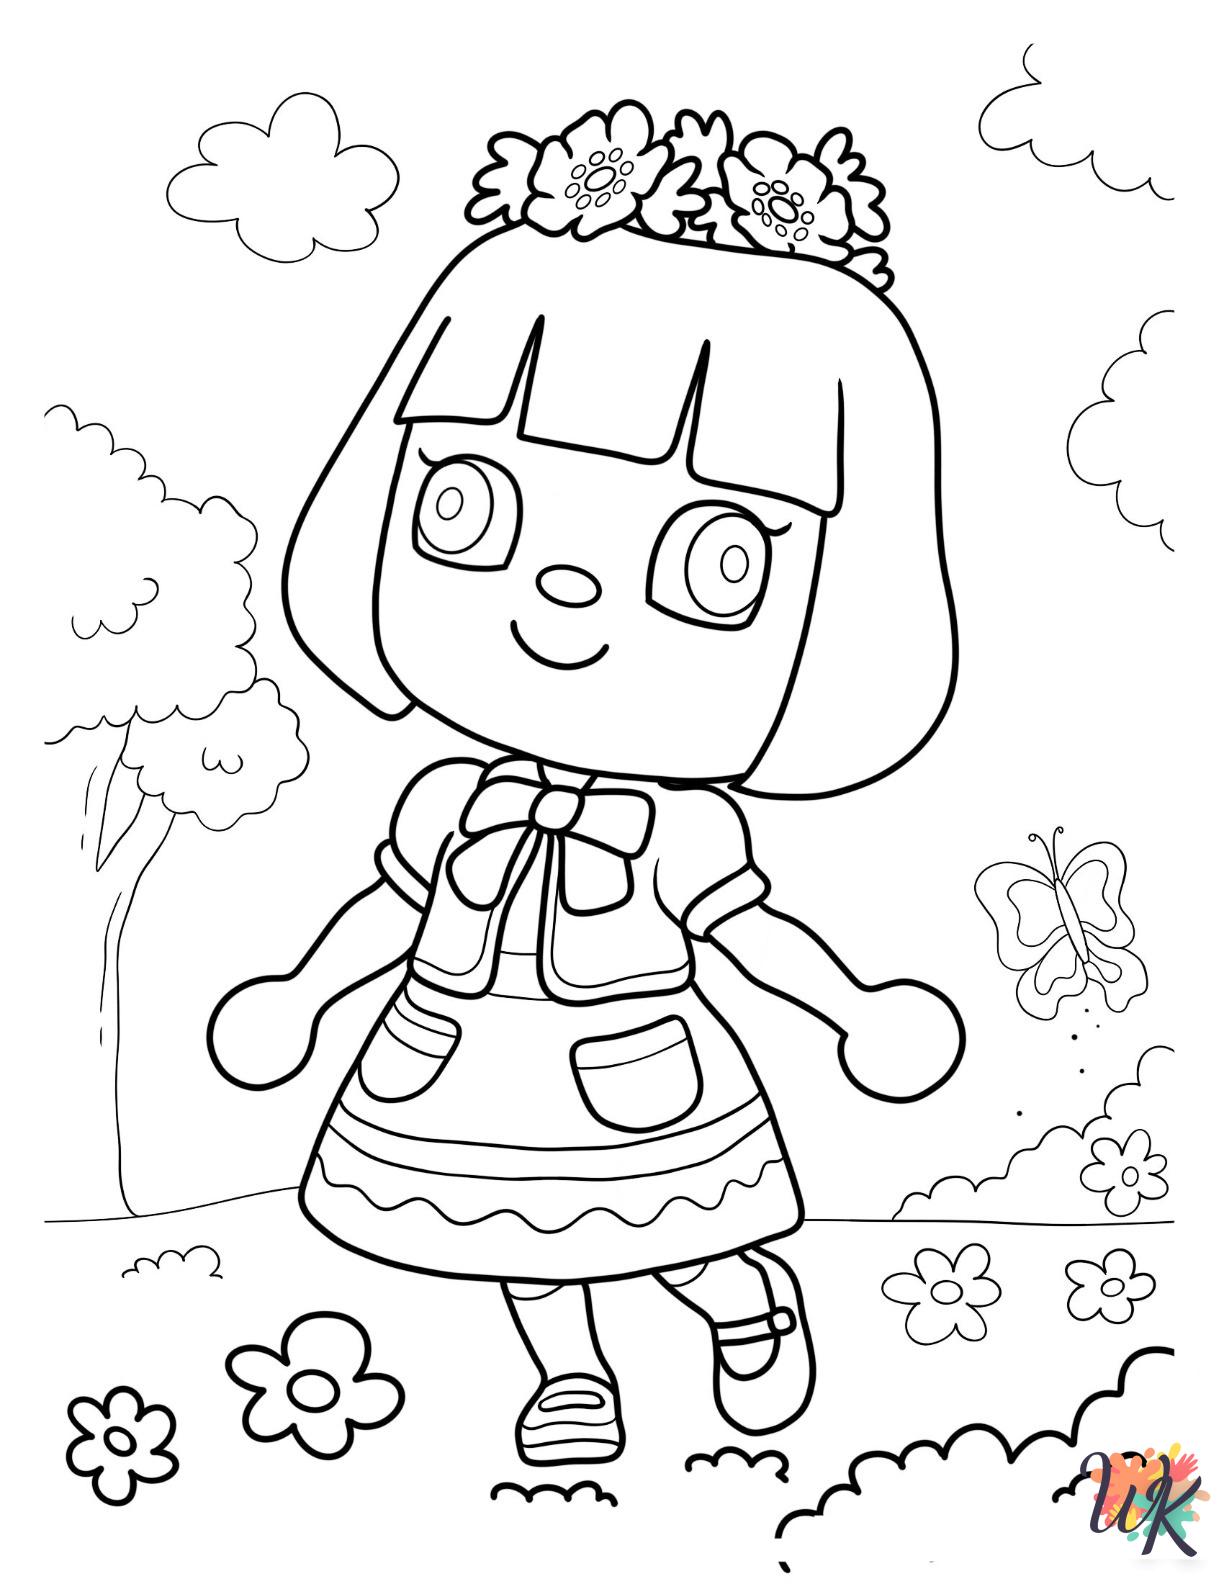 printable coloring pages Animal Crossing